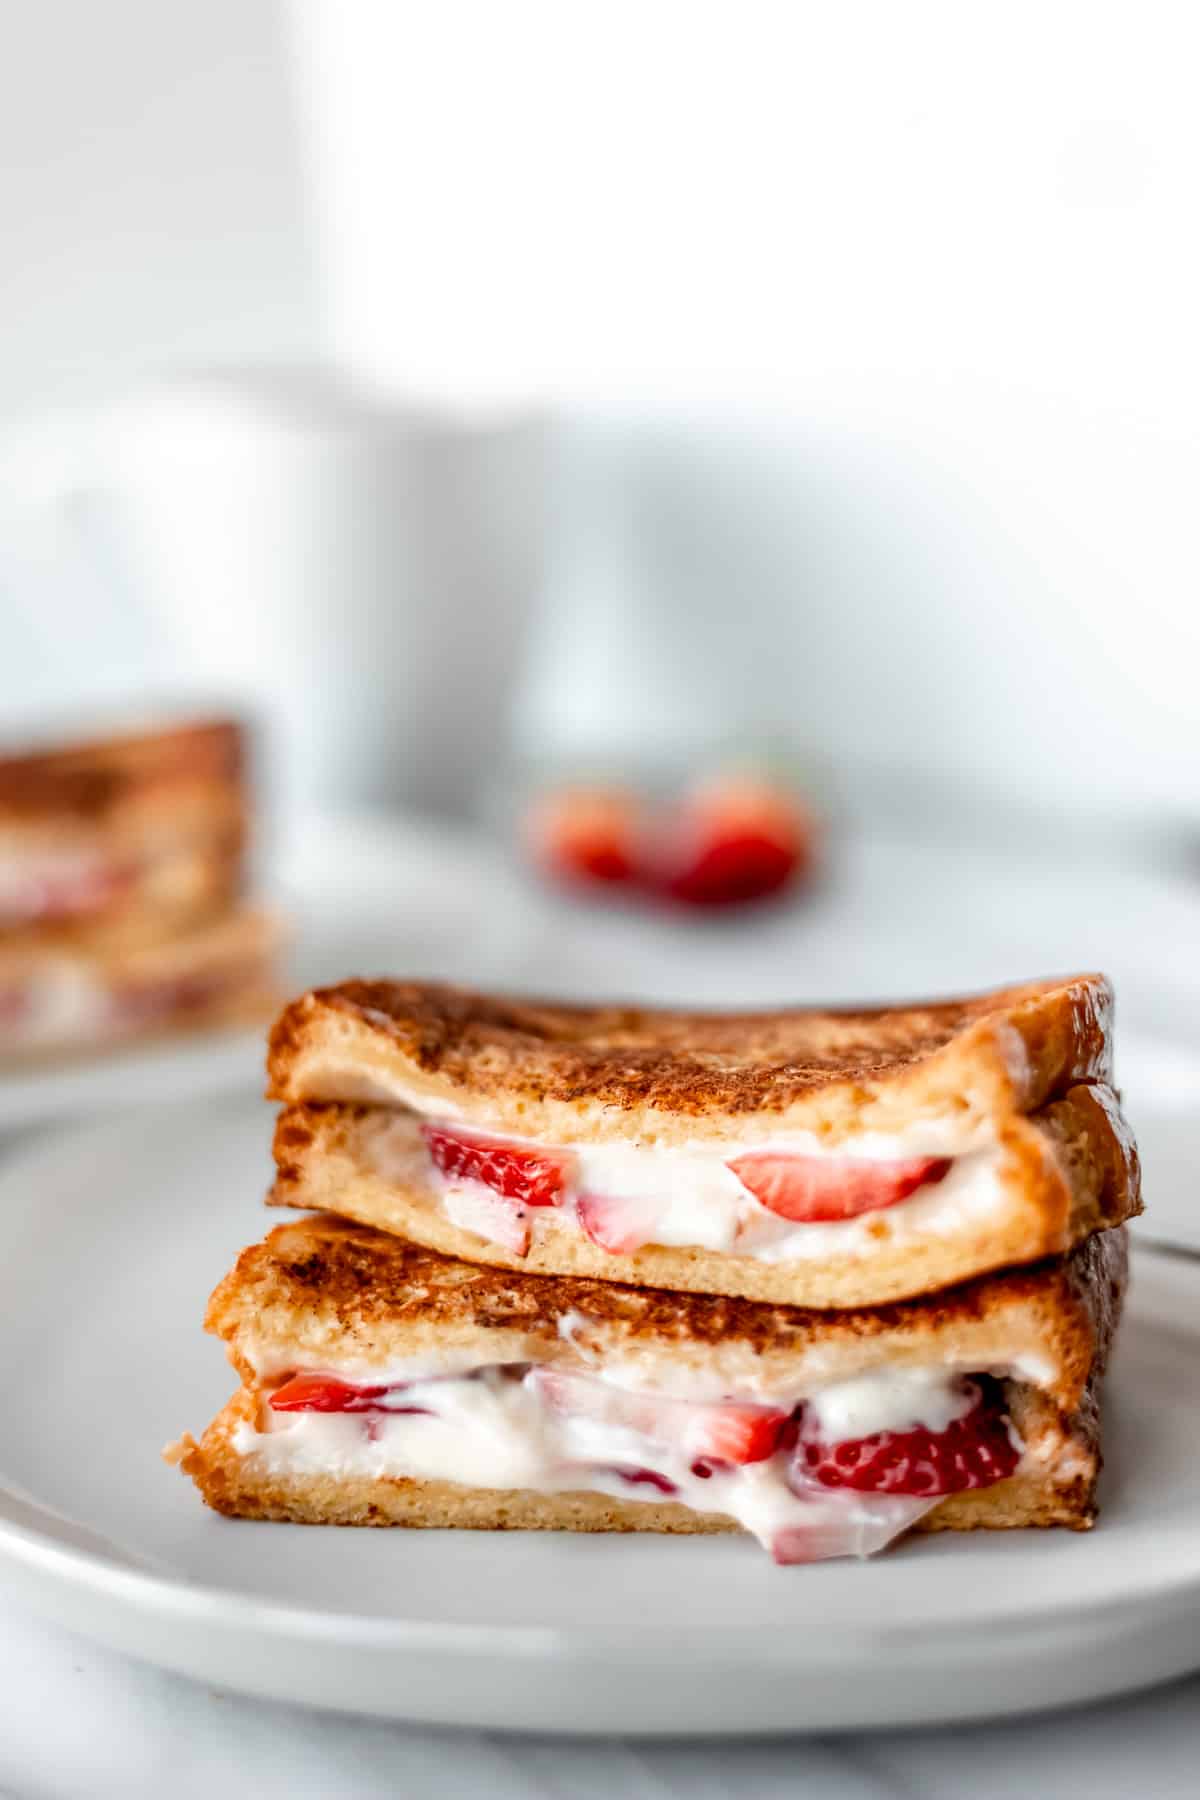 Close up of two halves of Strawberry French Toast stacked on top of each other on a white plate with a second plate blurred in the background.